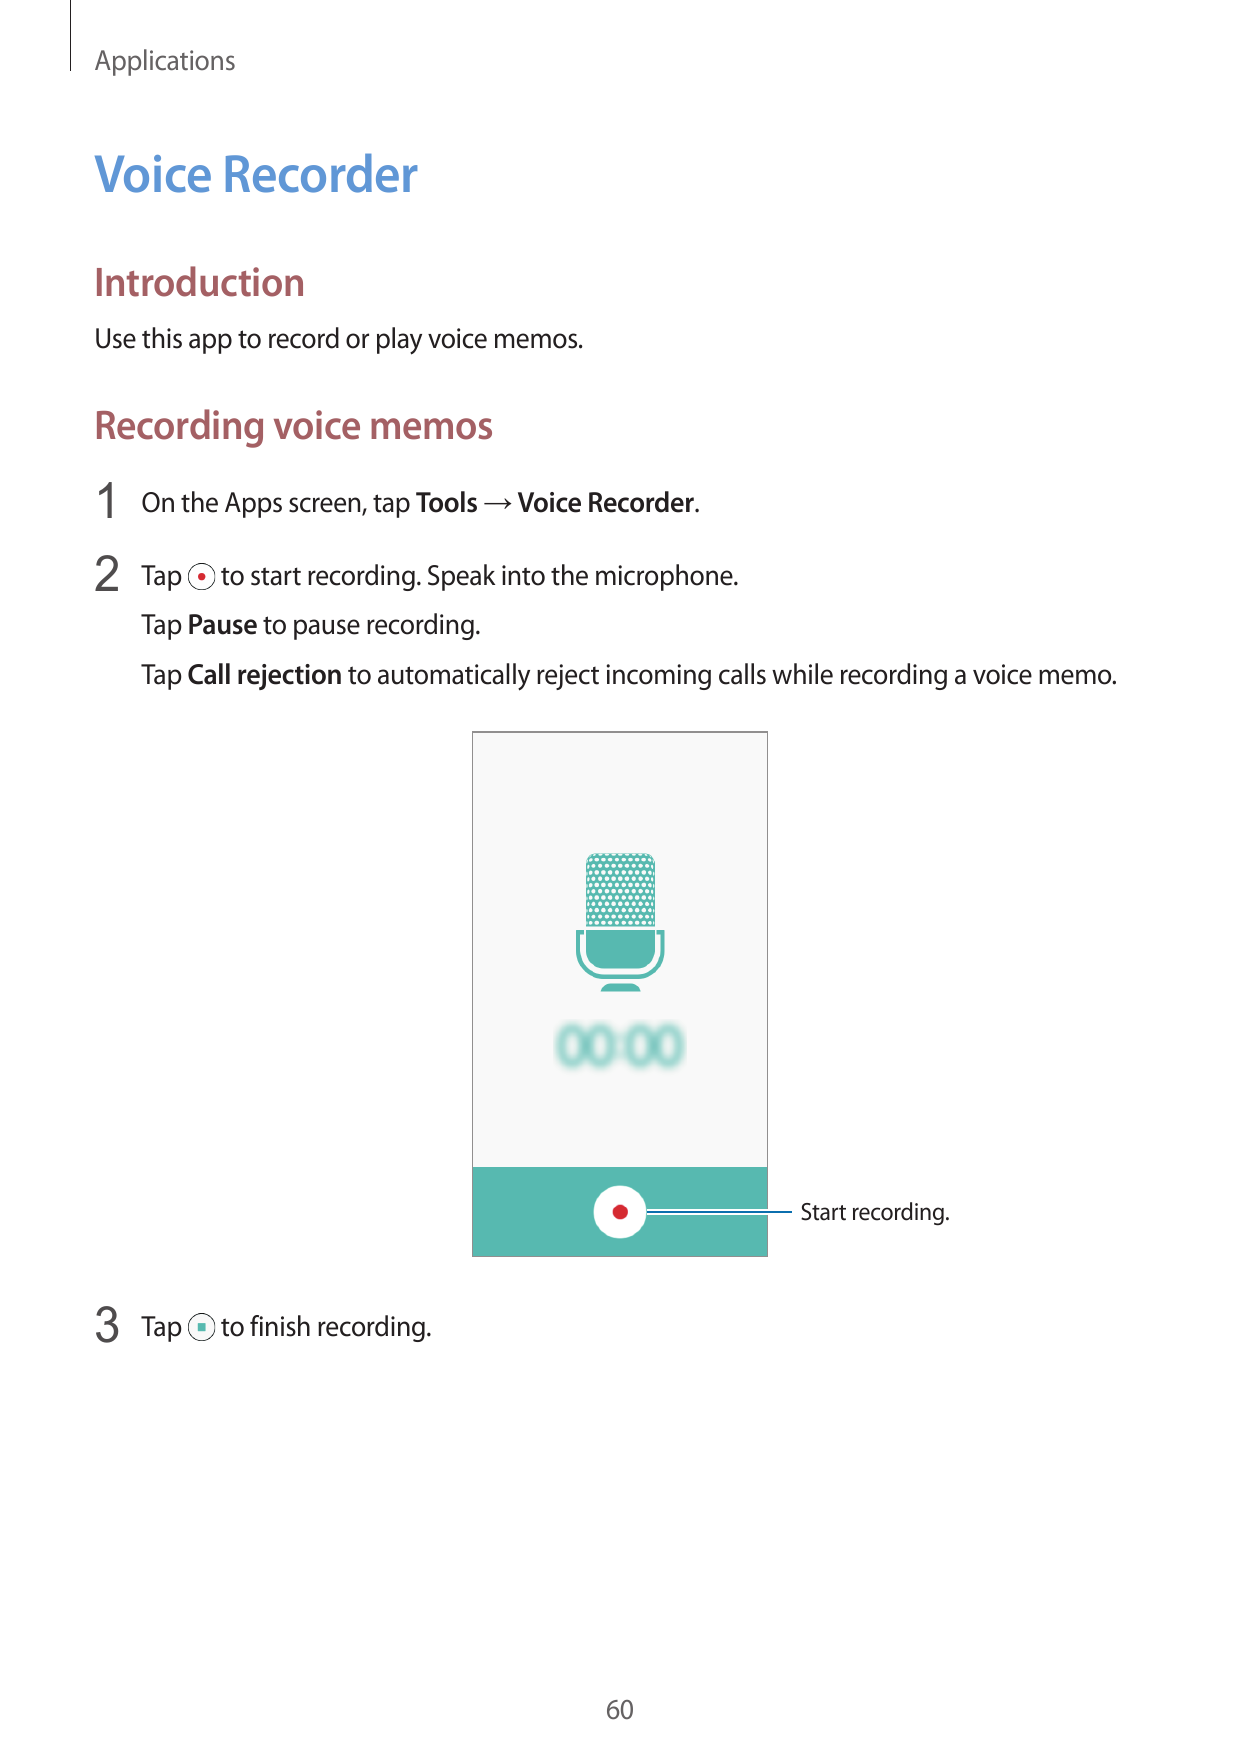 ApplicationsVoice RecorderIntroductionUse this app to record or play voice memos.Recording voice memos1 On the Apps screen, tap 